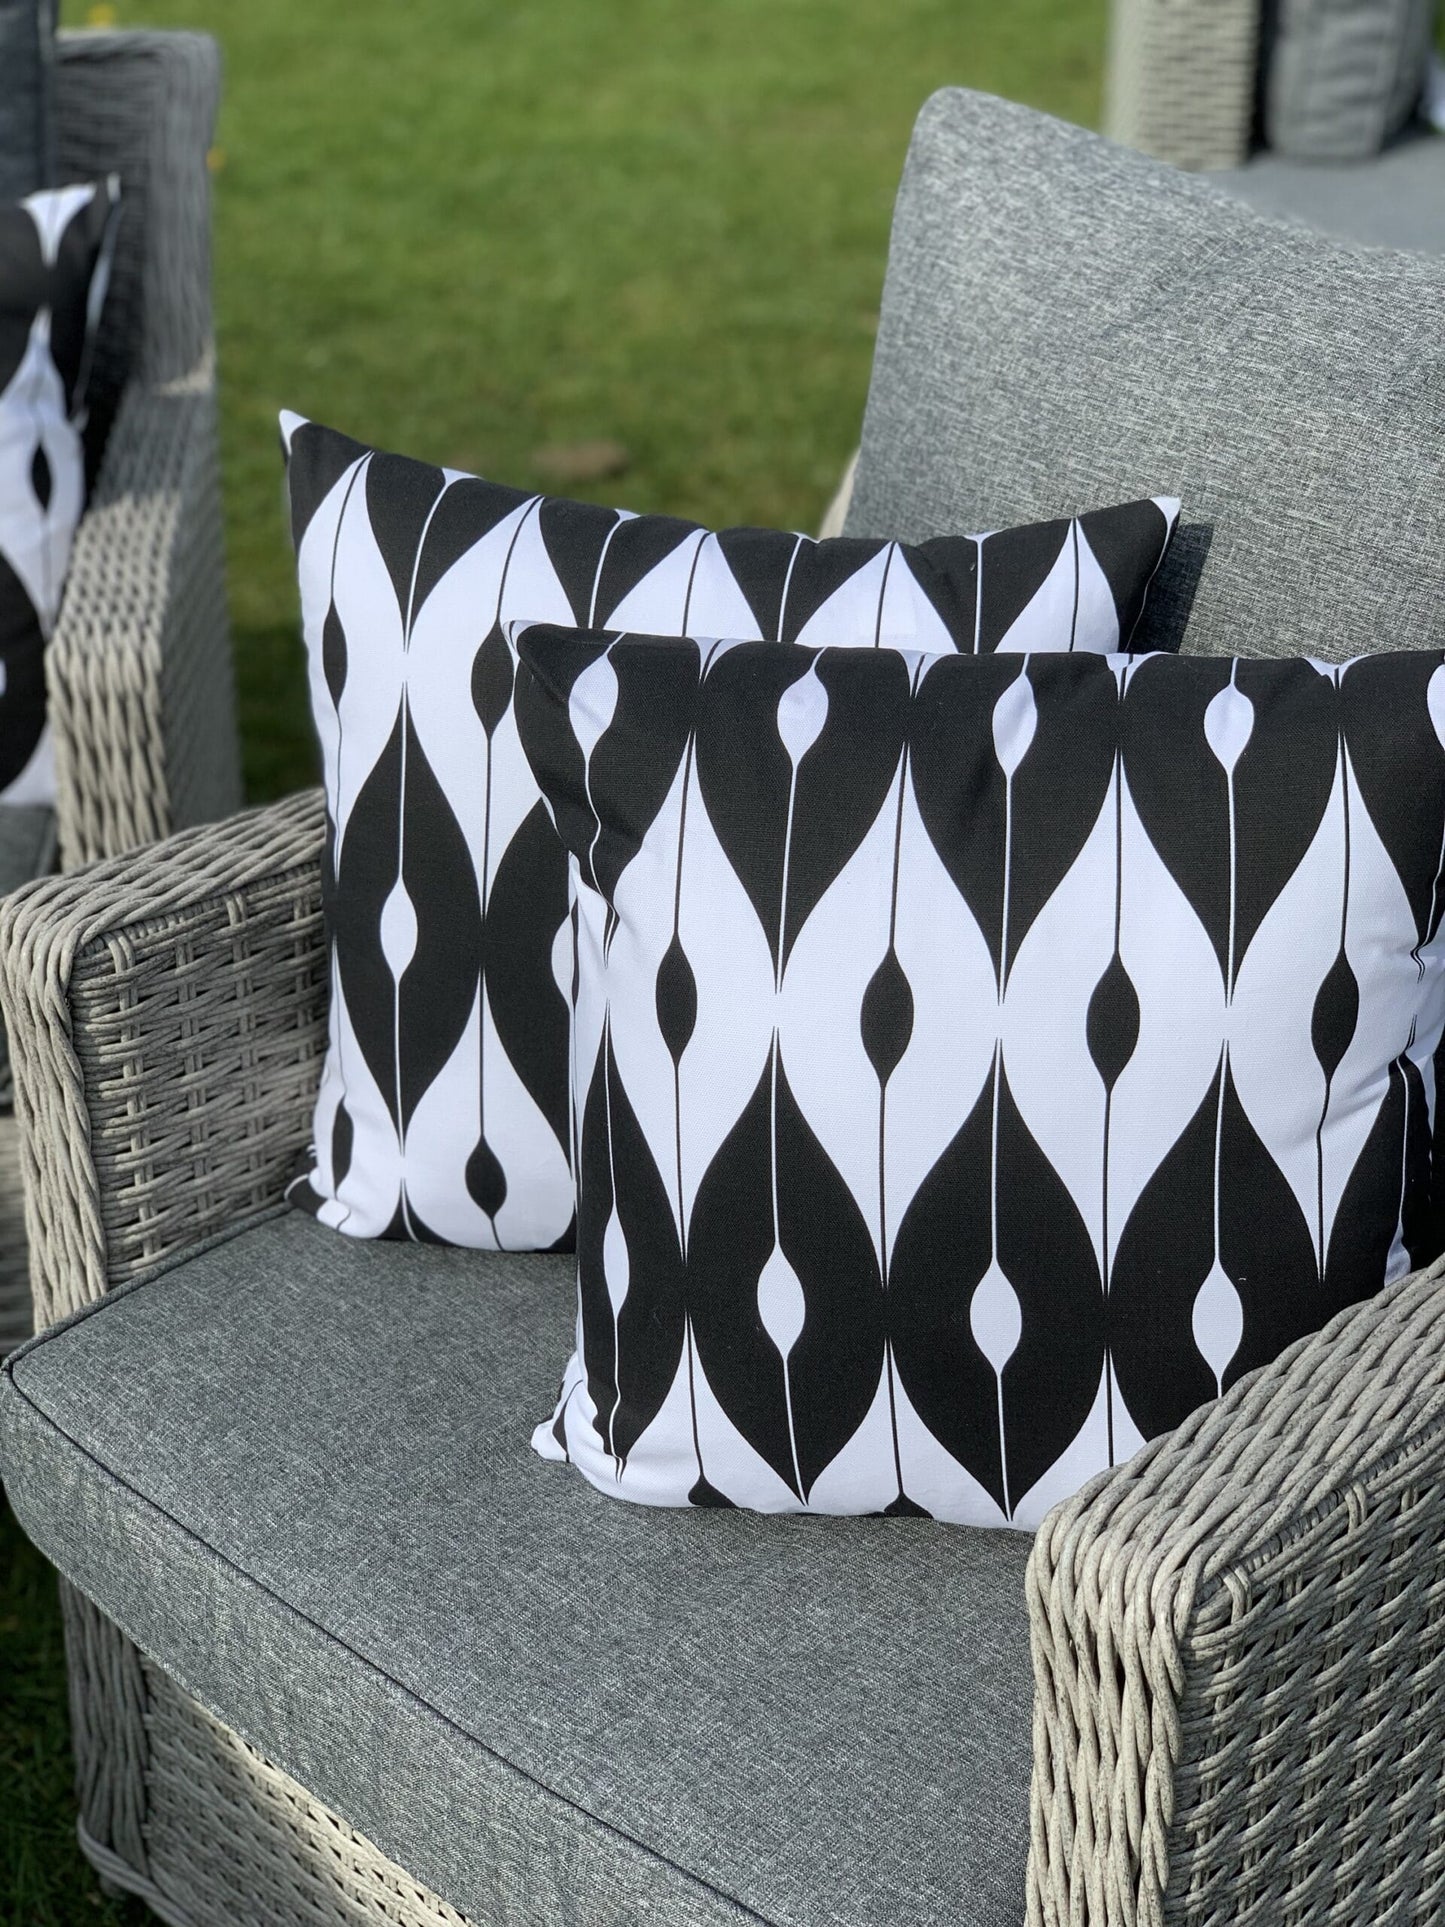 Outdoor Scatter Cushions (Pair) 18" x 18" Black Biometric Pattern